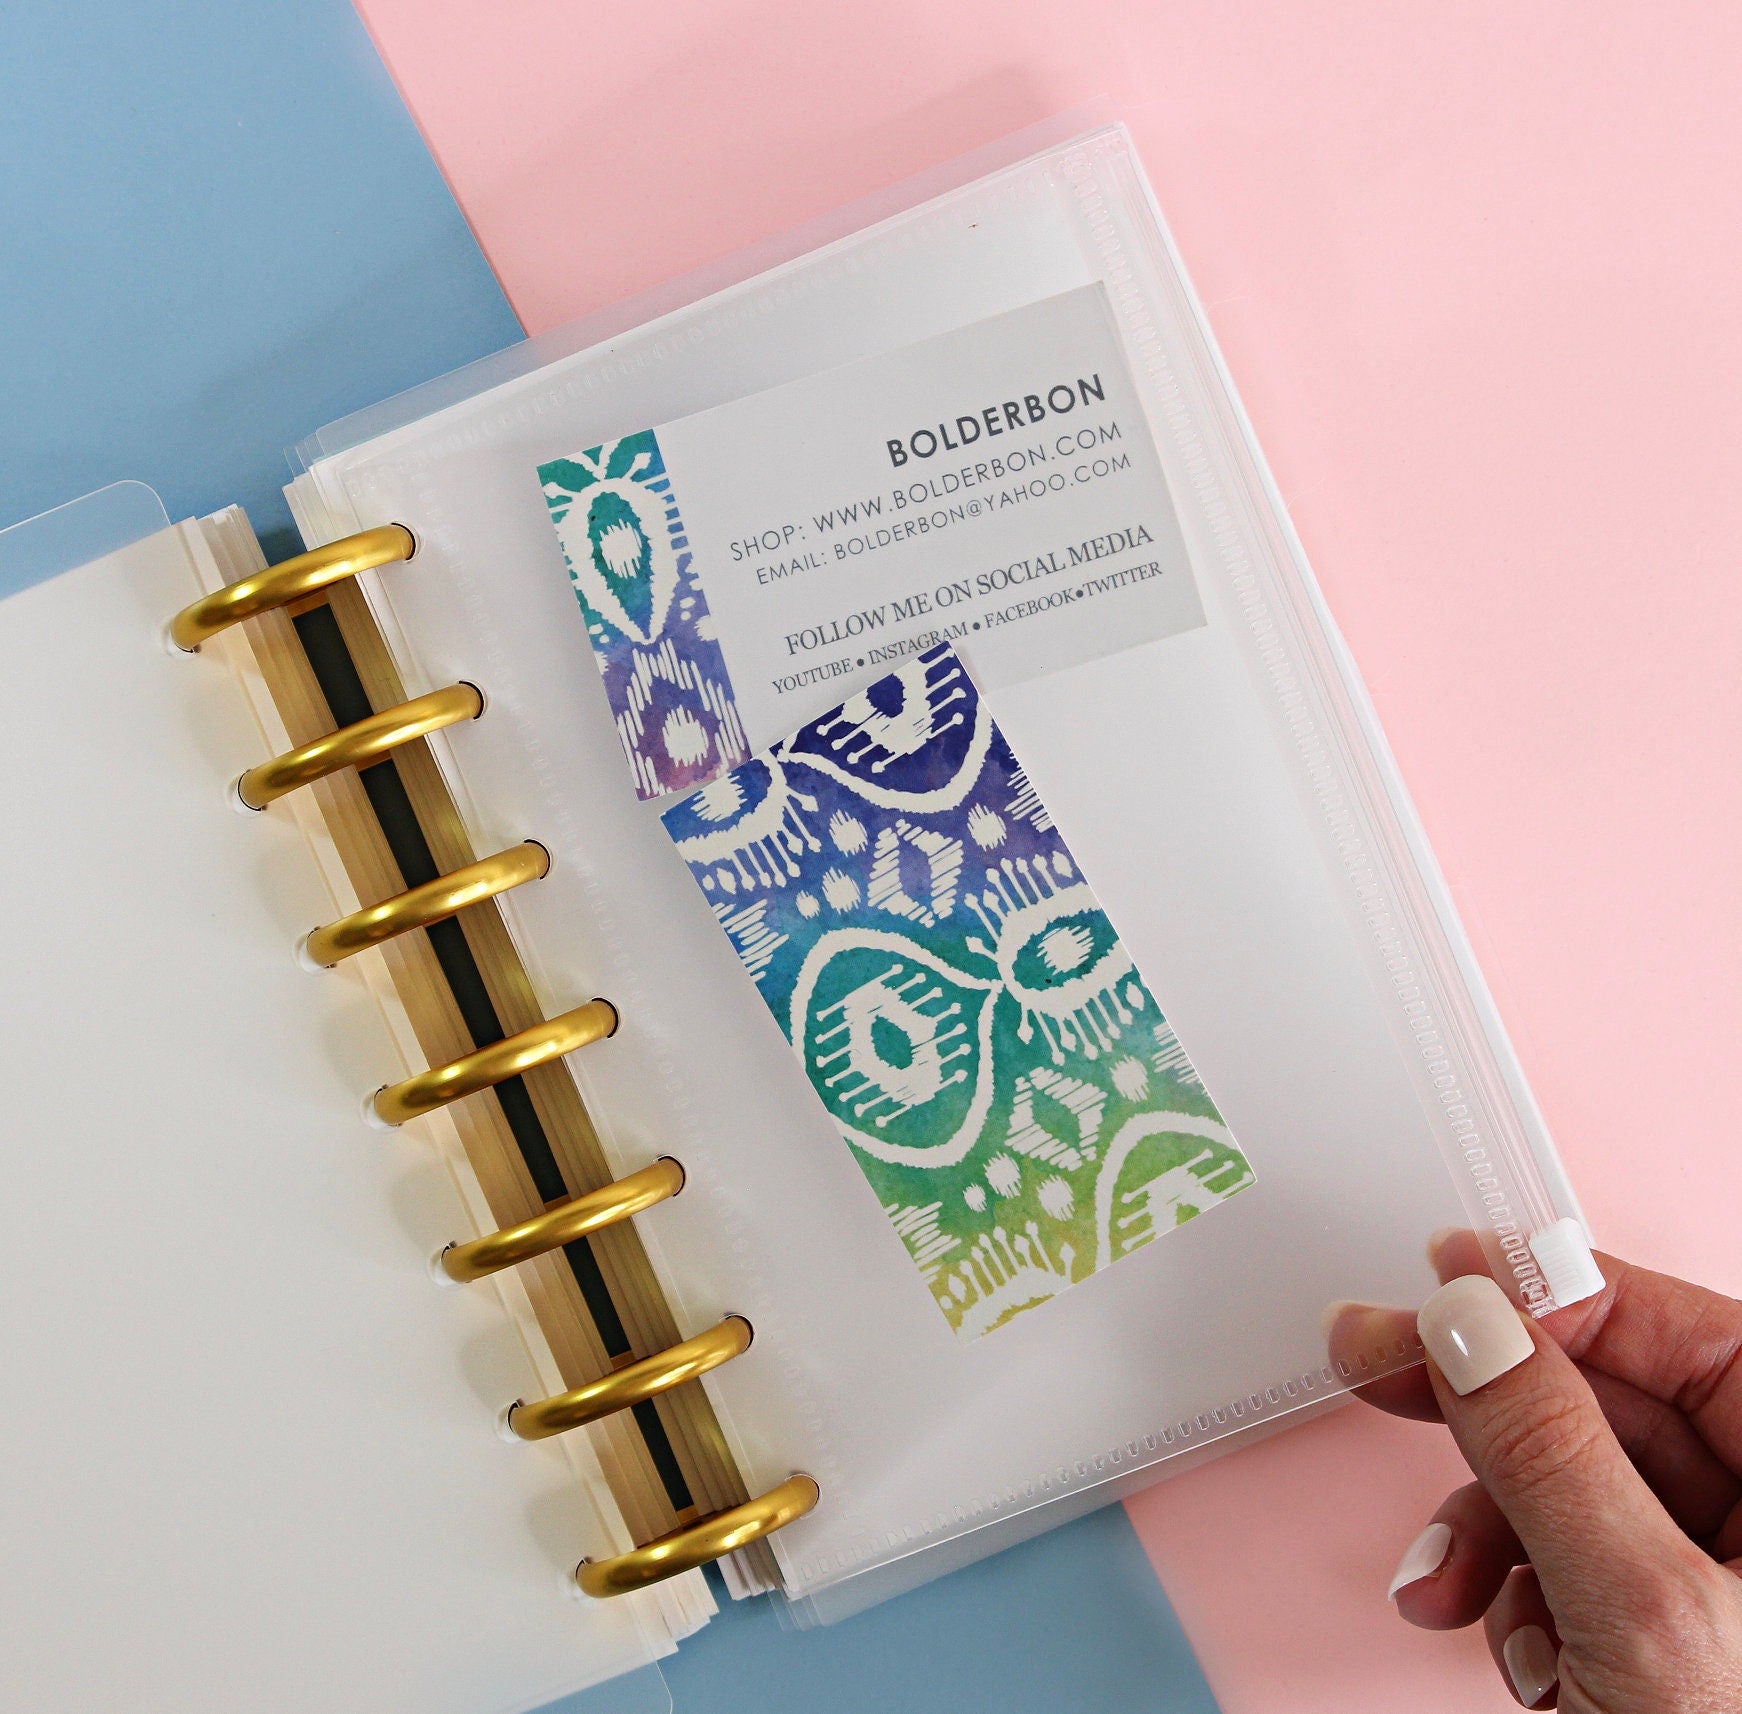 Discbound Punch for All Paper Sizes, Planner Puncher